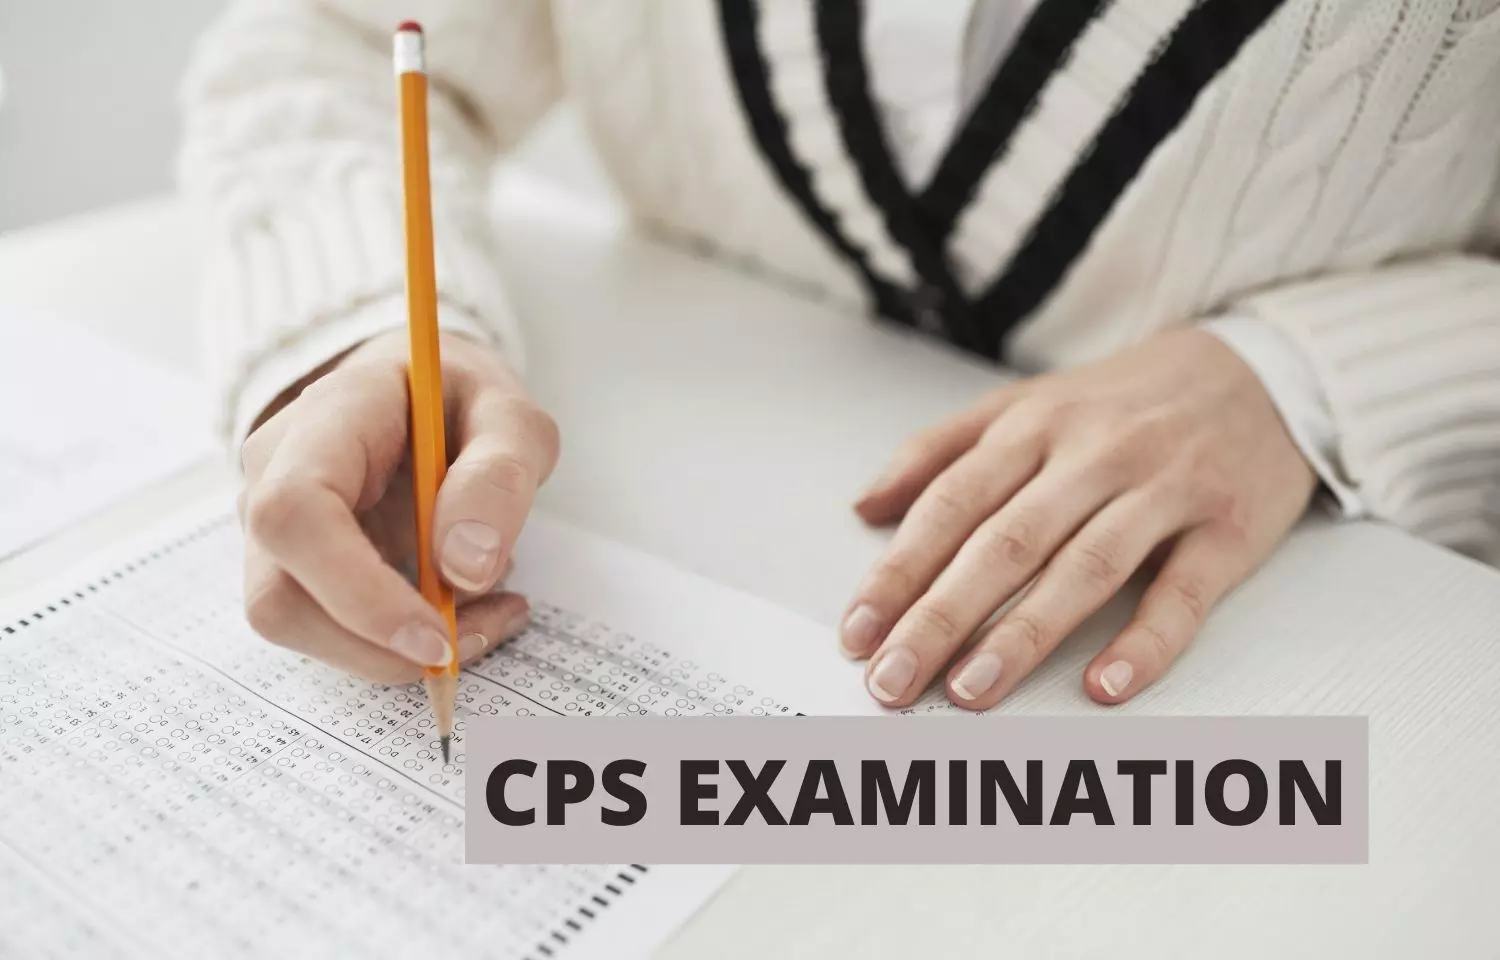 CPS extends Last Date For Submitting Online Form for November 2021 exams